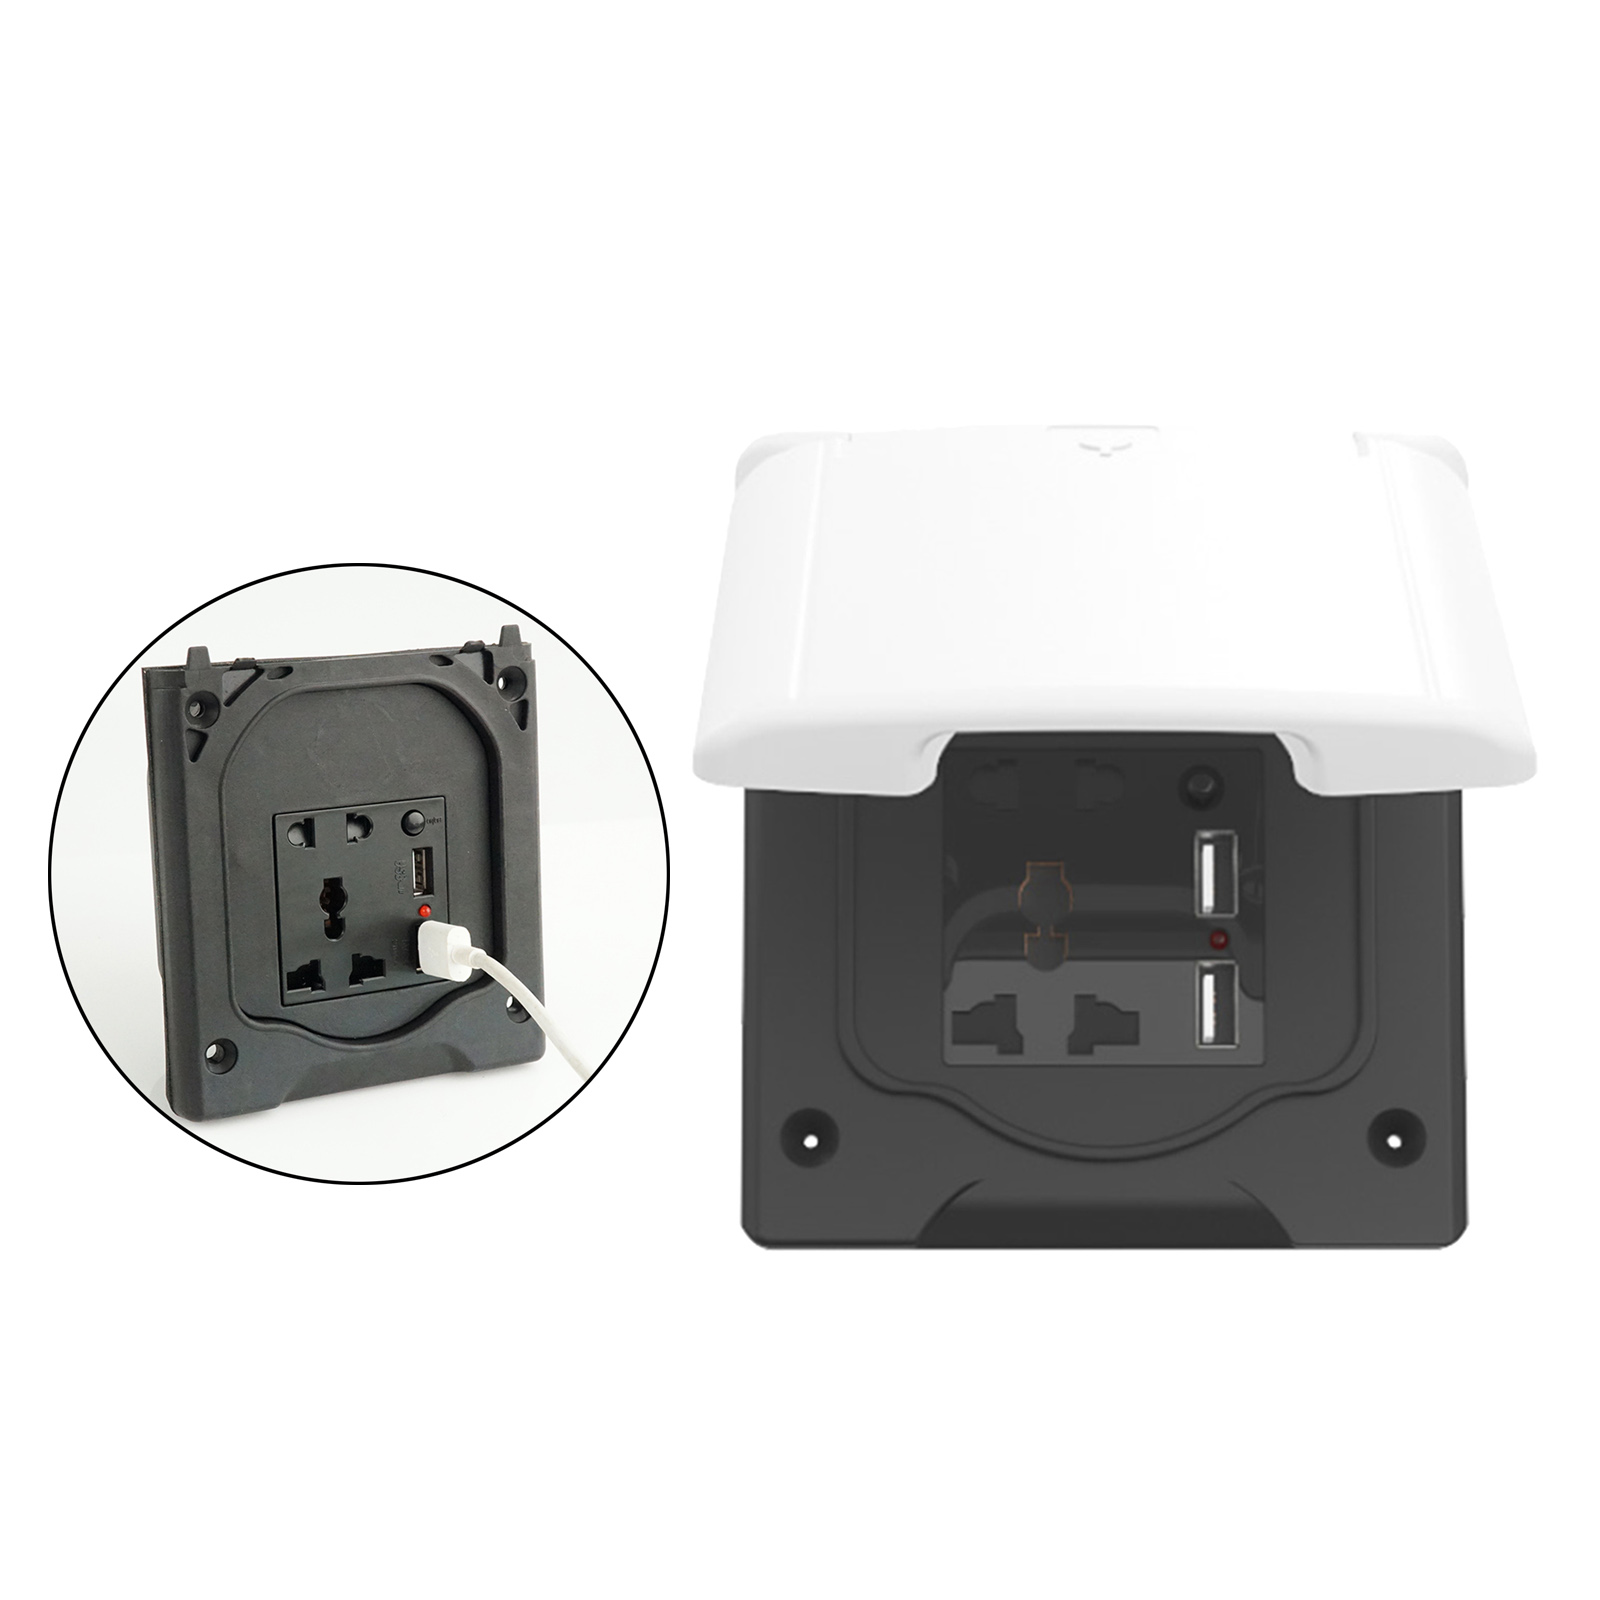 RV Power Outlet Box 10A IP44 Electrical Box for Campers Car Charger Adapter